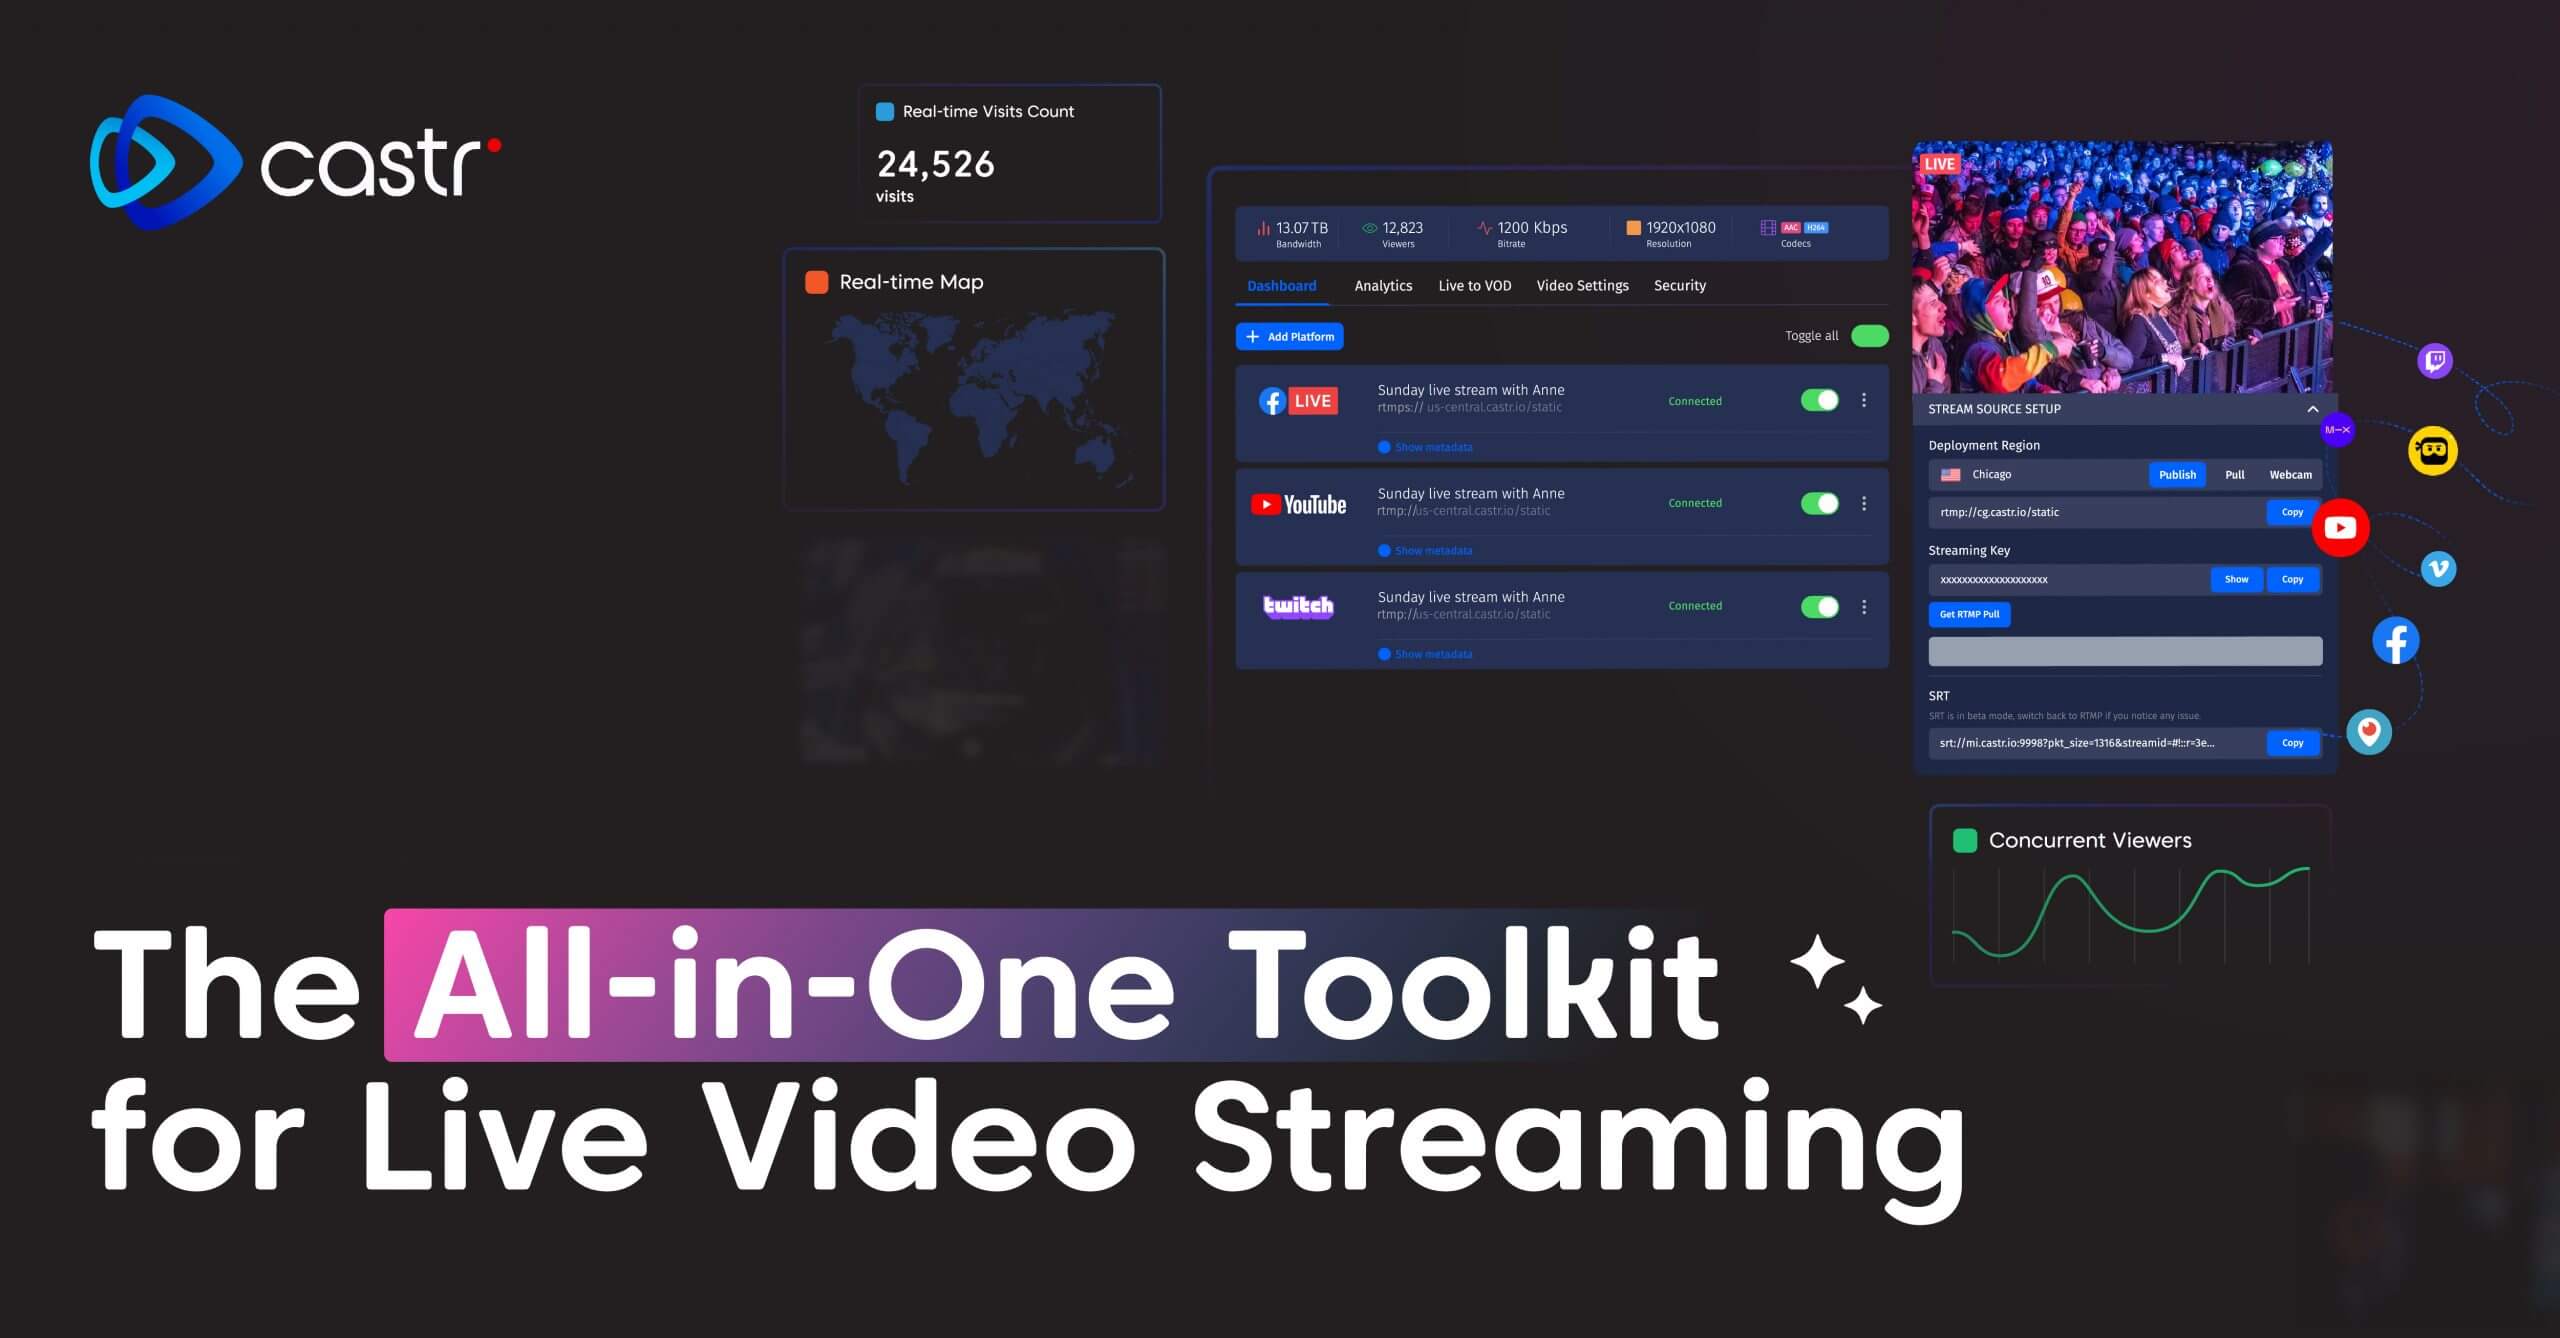 Castr #1 Live Video Streaming Solution With Video Hosting